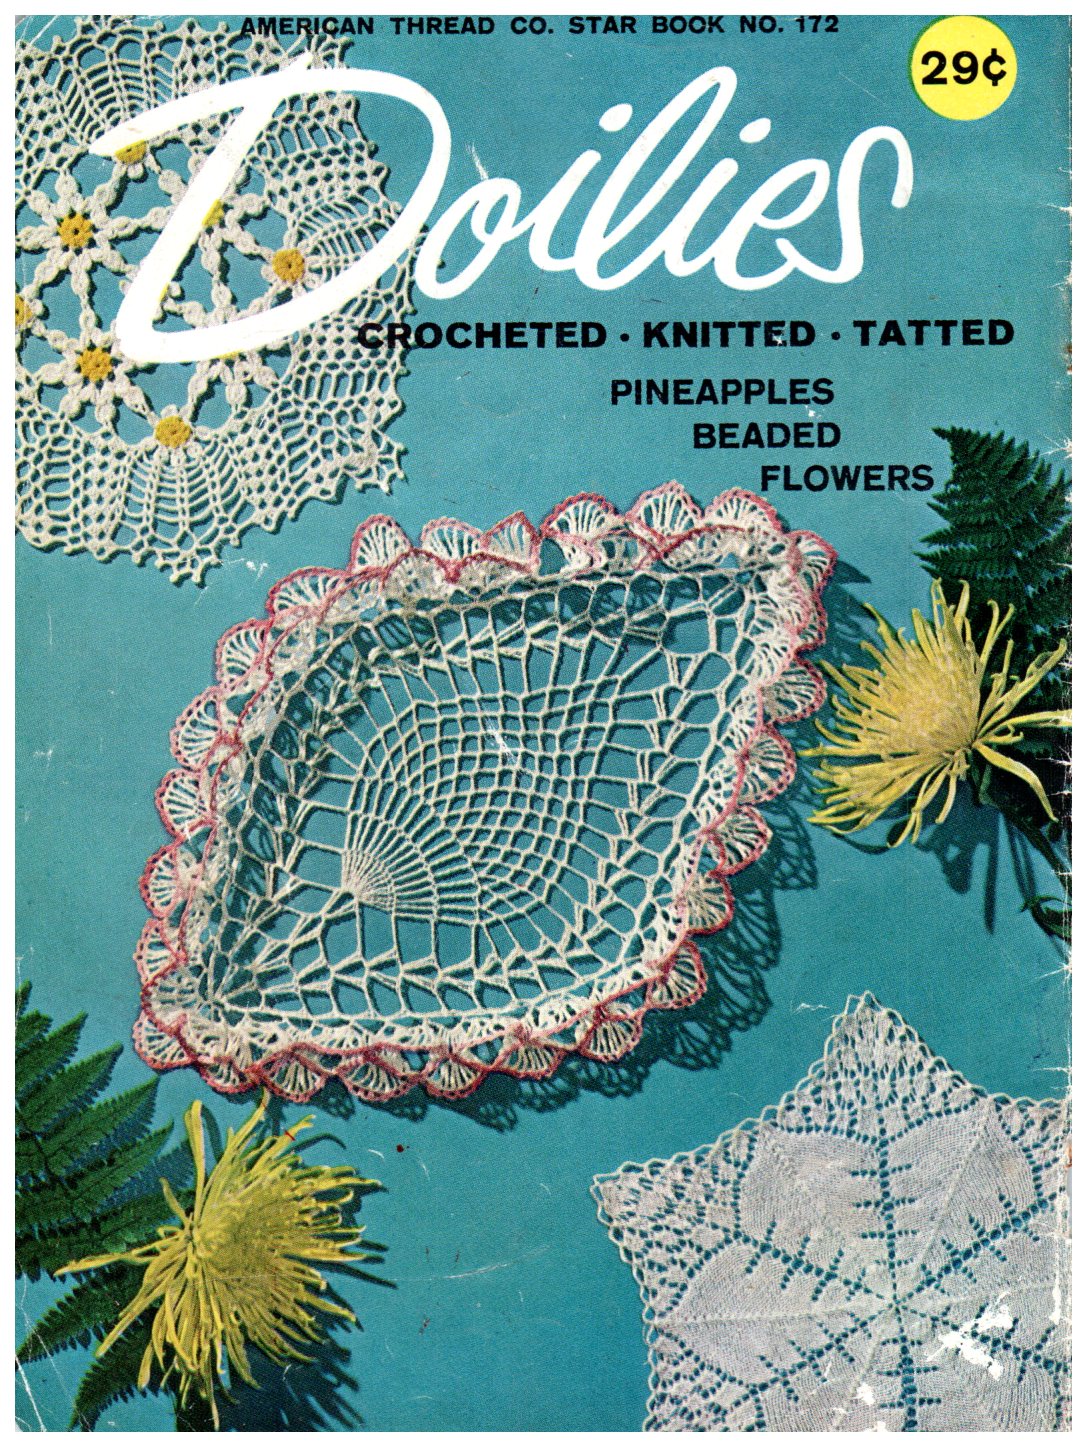 Vintage Doily Pattern Book Pineapple Crochet Knit Tatted American Thread Co. Star Book No 172 Downloadable PDF - At Grandma's Table